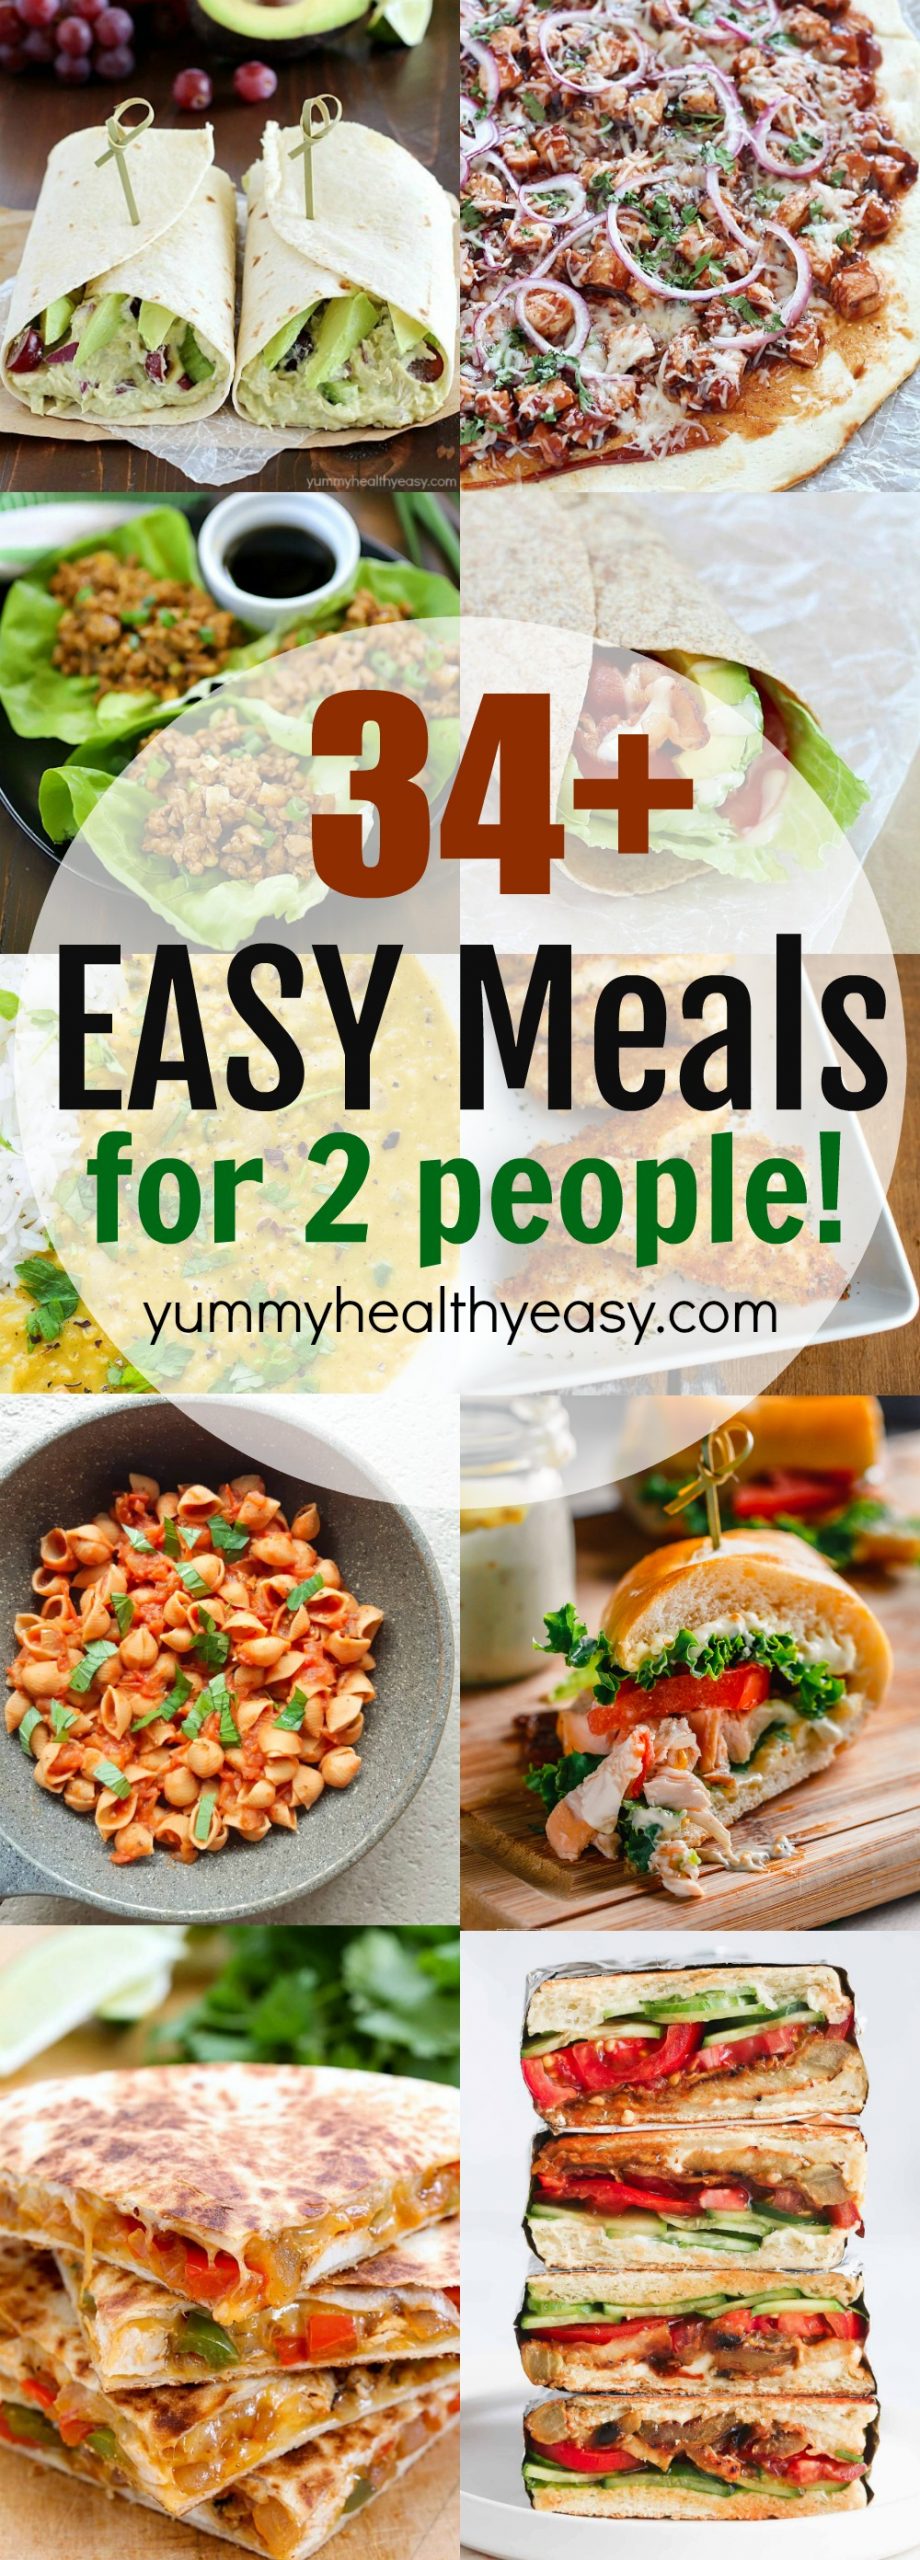 18 Easy Meal Recipes for Two People   Yummy Healthy Easy